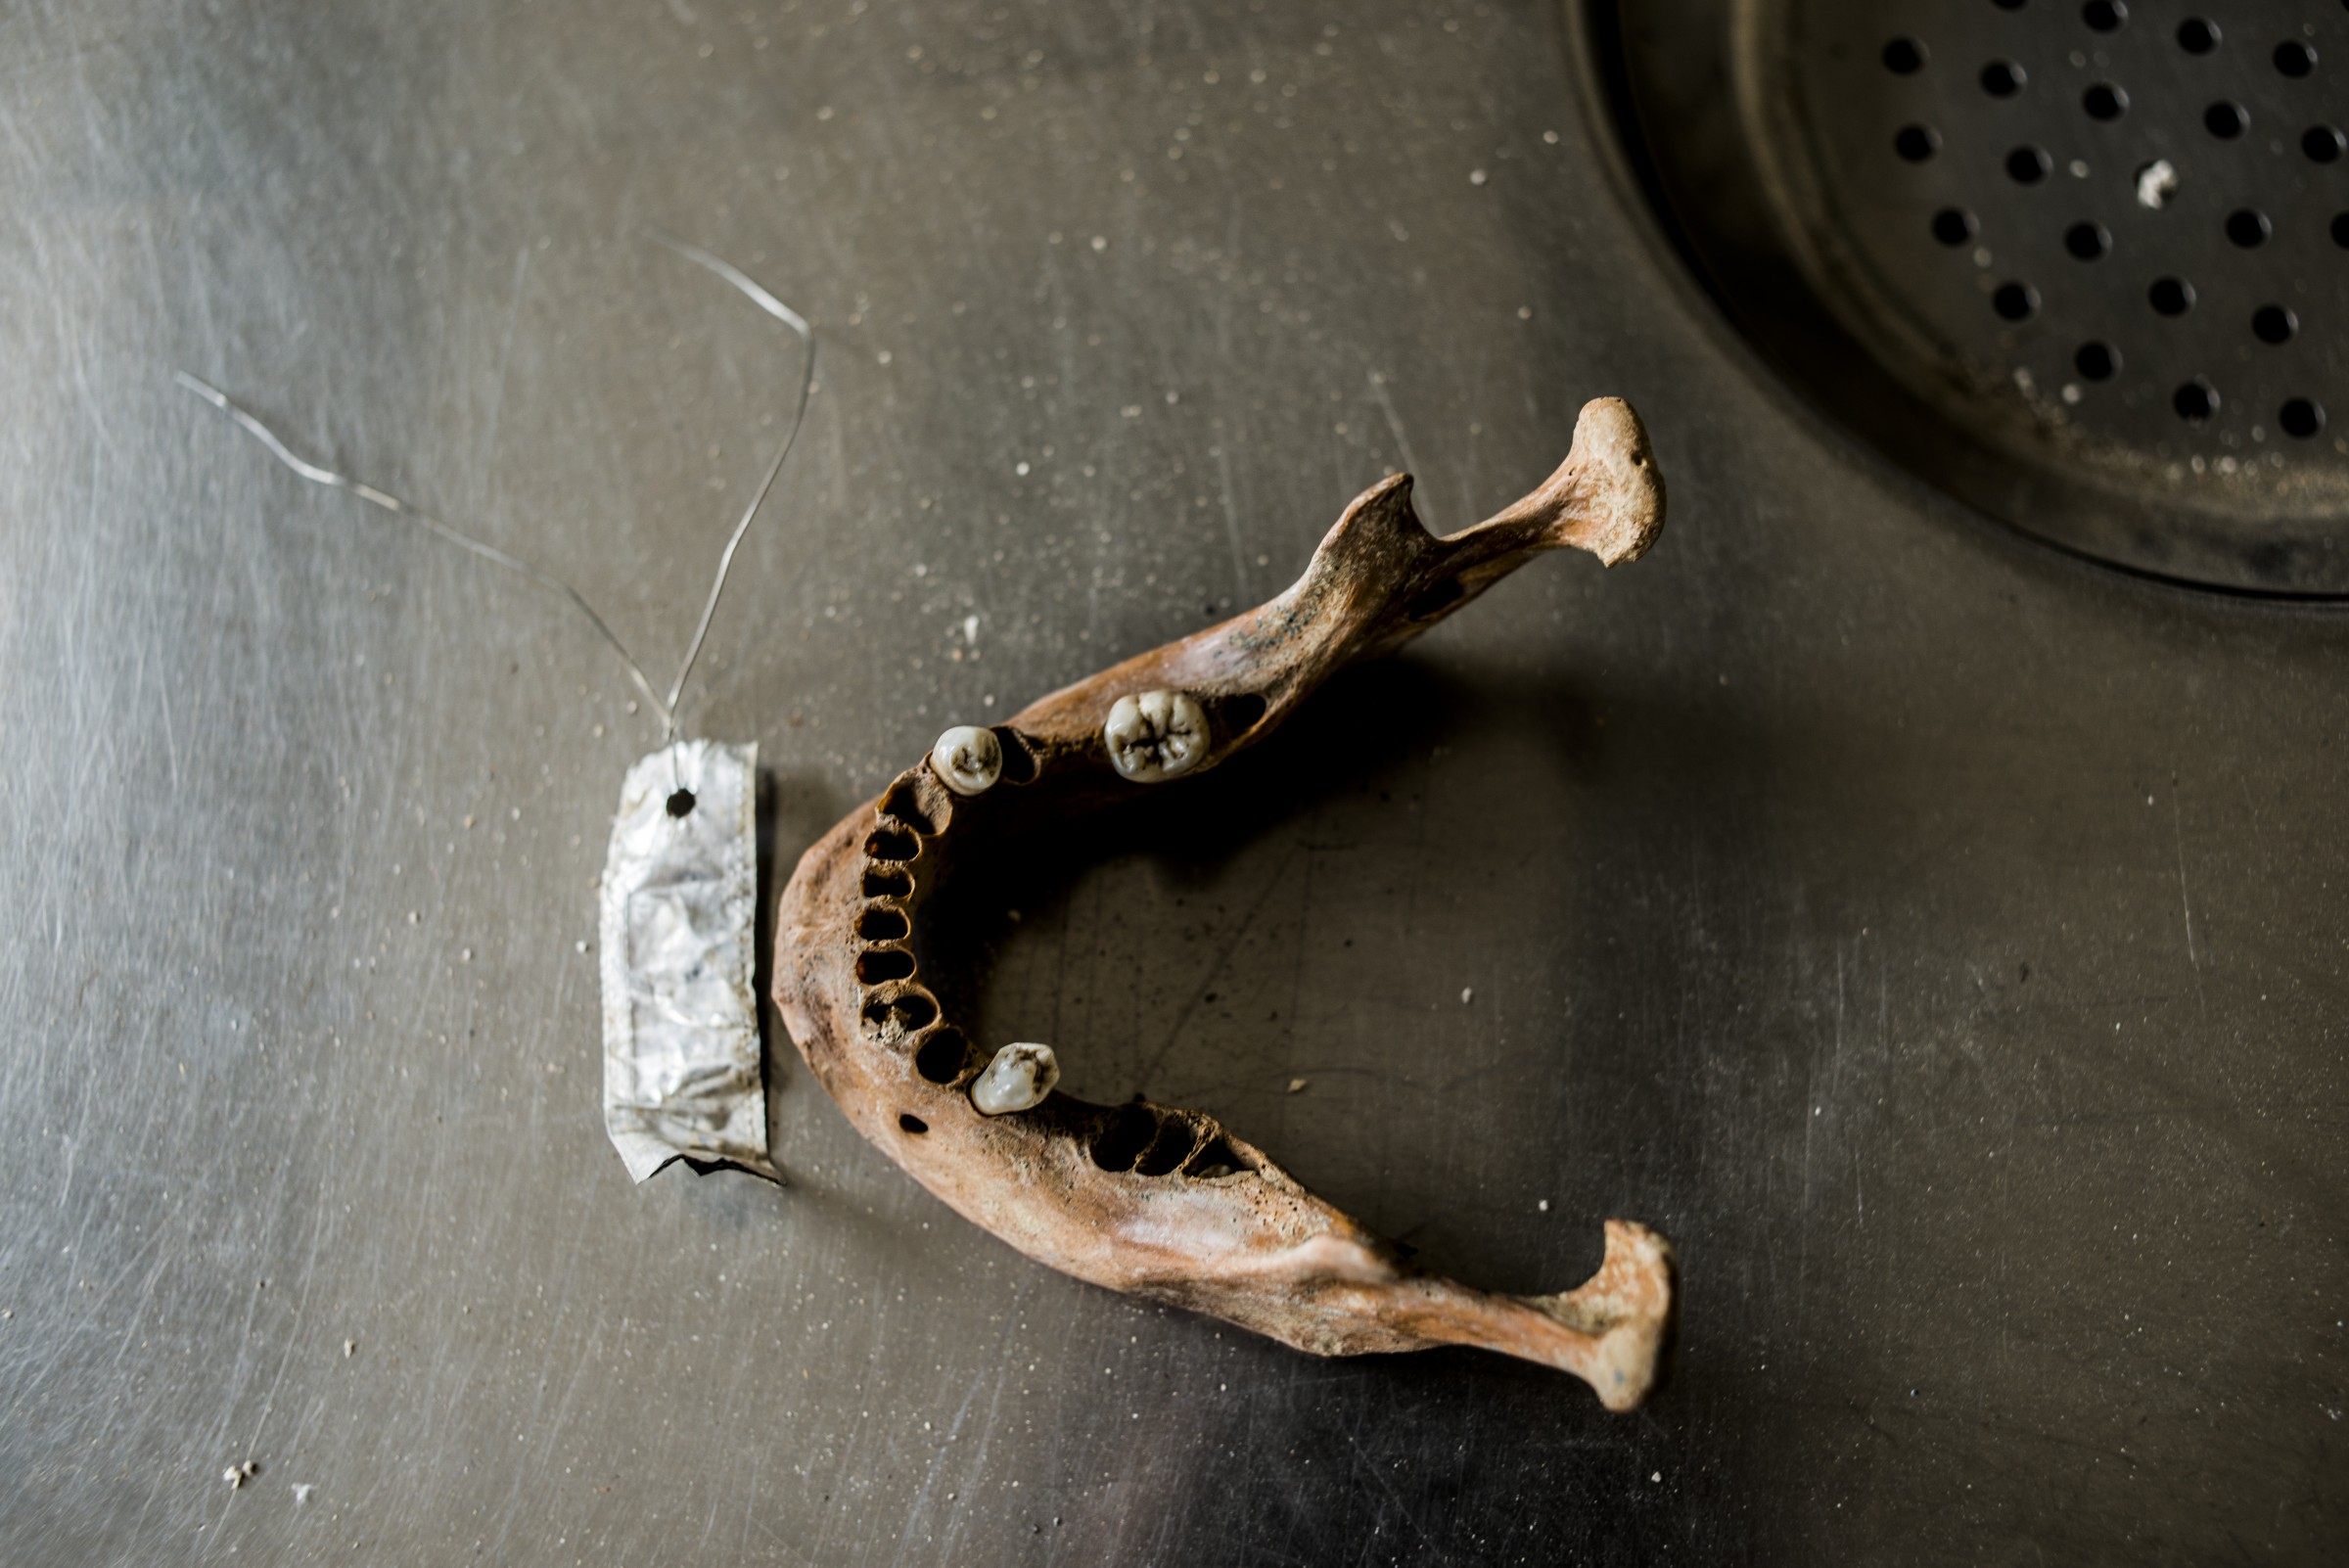 16 Jul 2014, Tuzla, Bosnia and Herzegovina --- A lower jaw bone on a medical table in the ICMP DNA identification facility in Tuzla, Bosnia-Herzegovina. --- Image by © Martyn Aim/Corbis